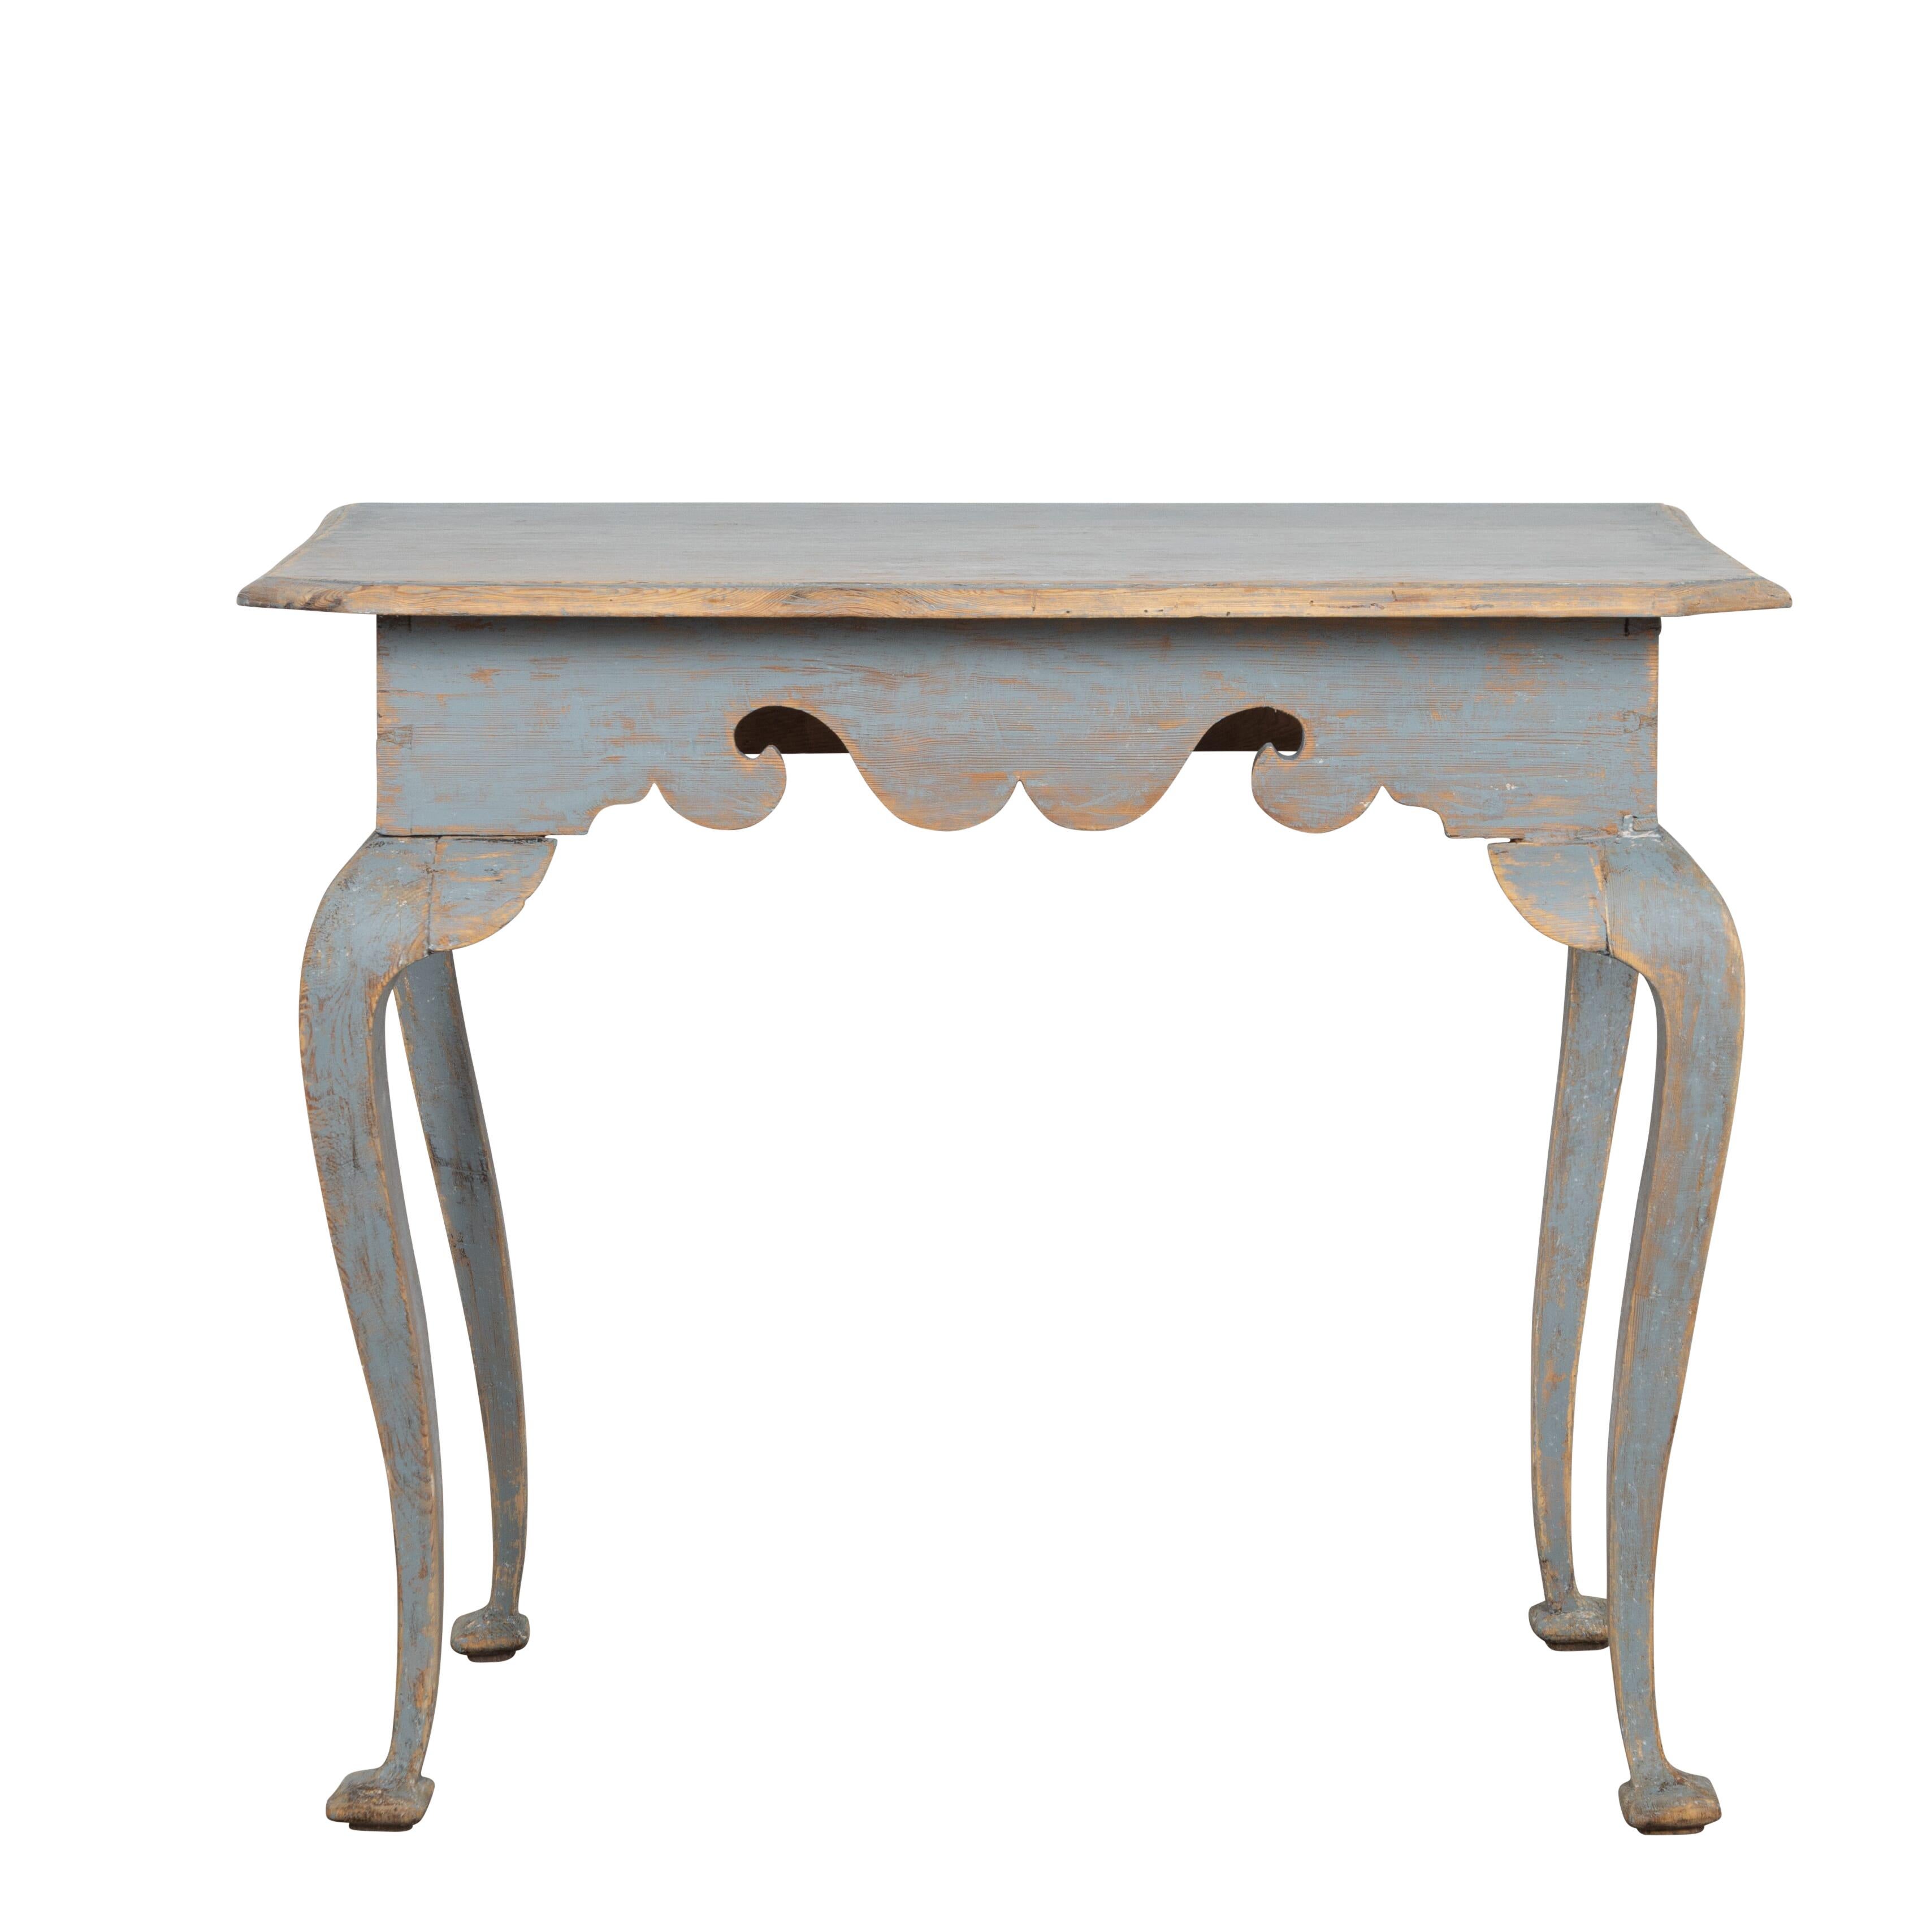 A period 18th Century Rococo console table.
With a decorative carved stretcher, and cabriolet legs, and repainted in blue.
Circa 1780.